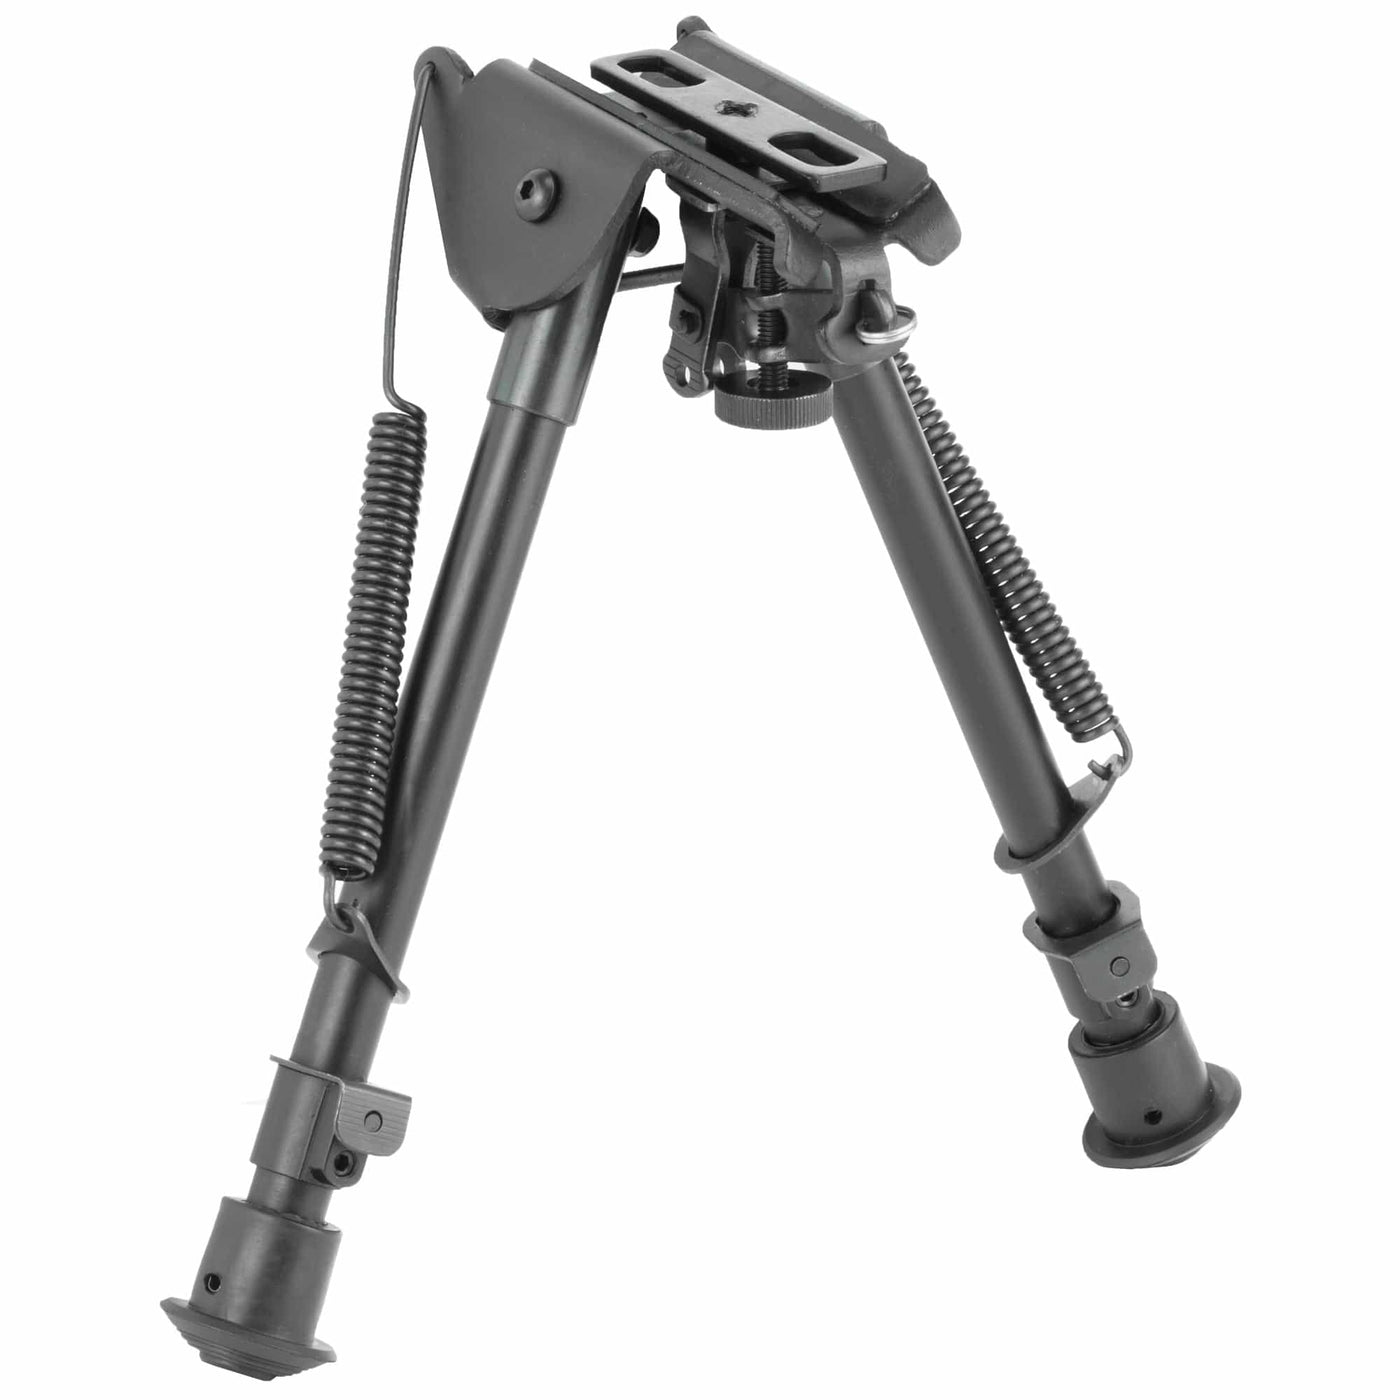 NCSTAR Ncstar Preci Grd Bipod Full Notched Grips/Pads/Stocks